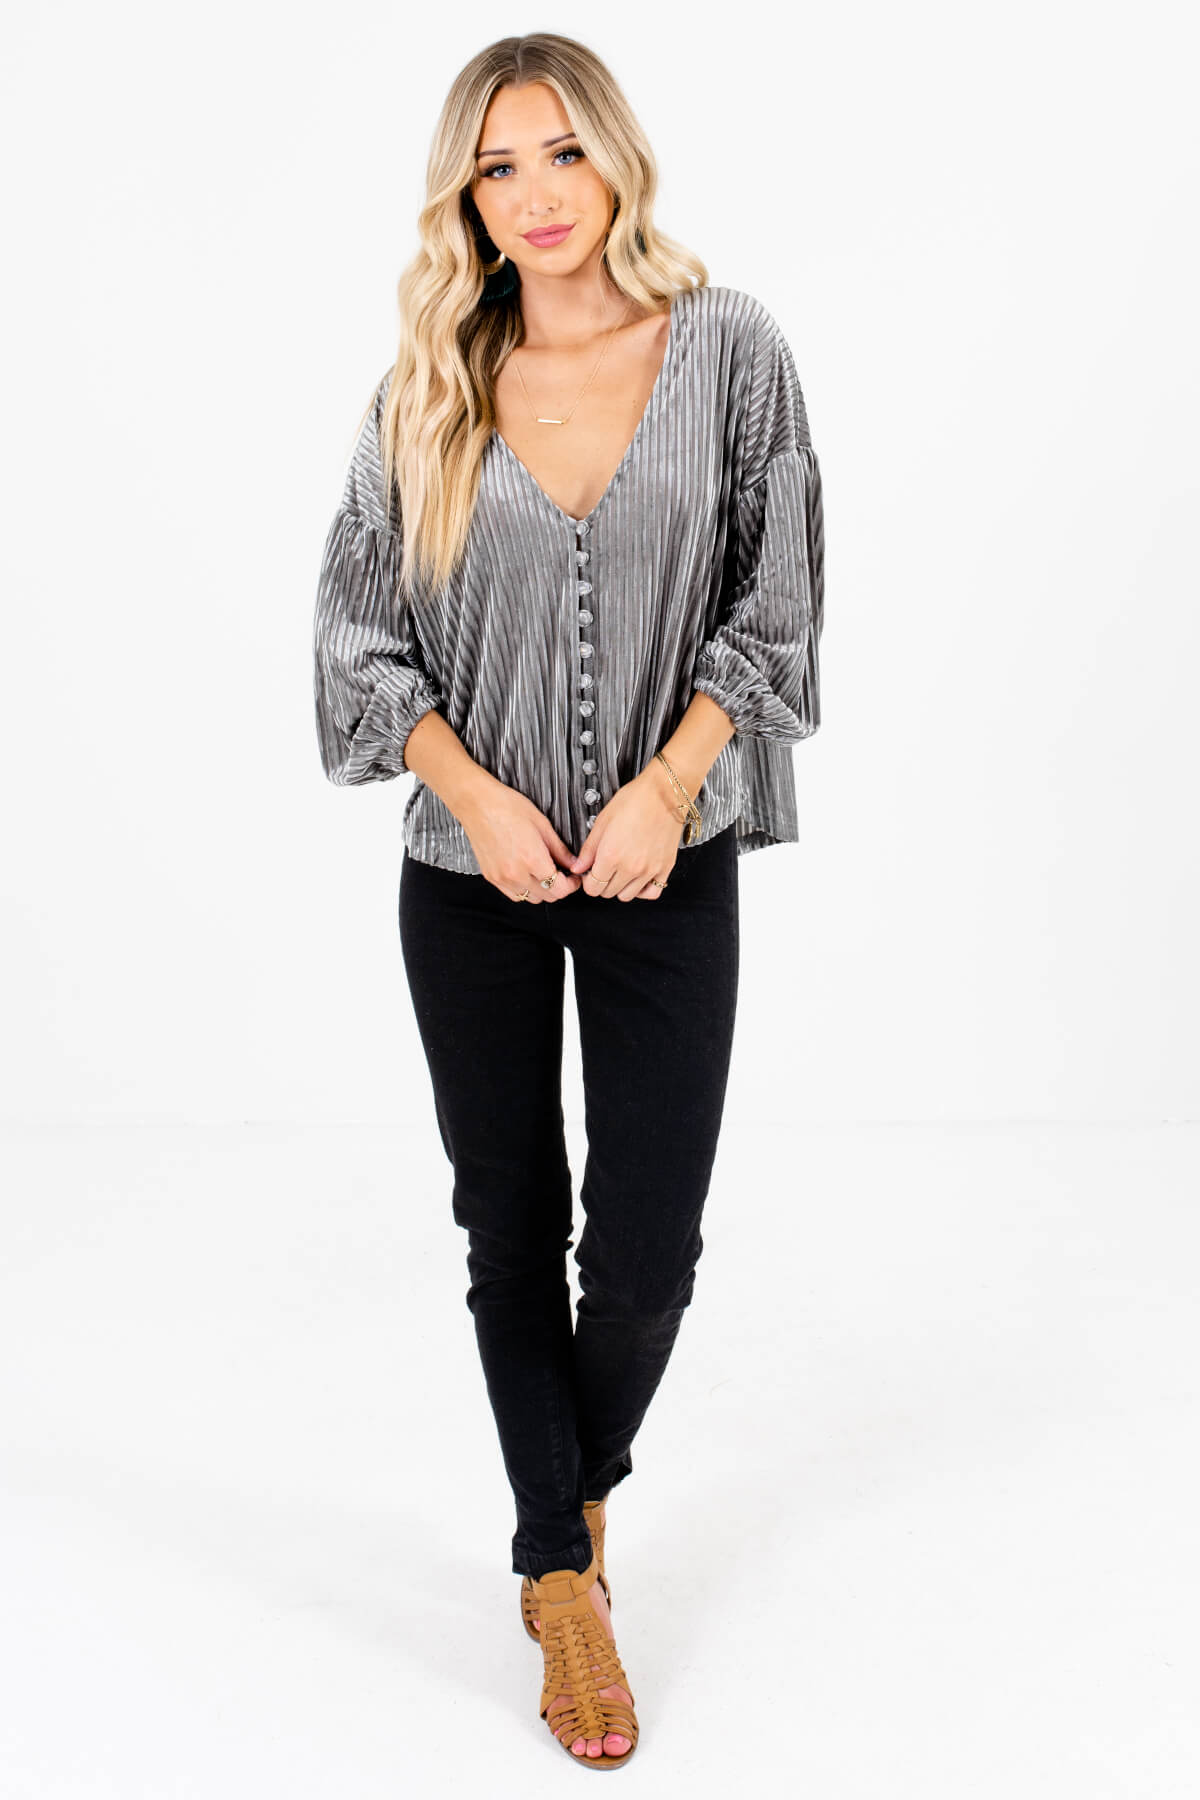 Women's Silver Gray Fall and Winter Boutique Clothing